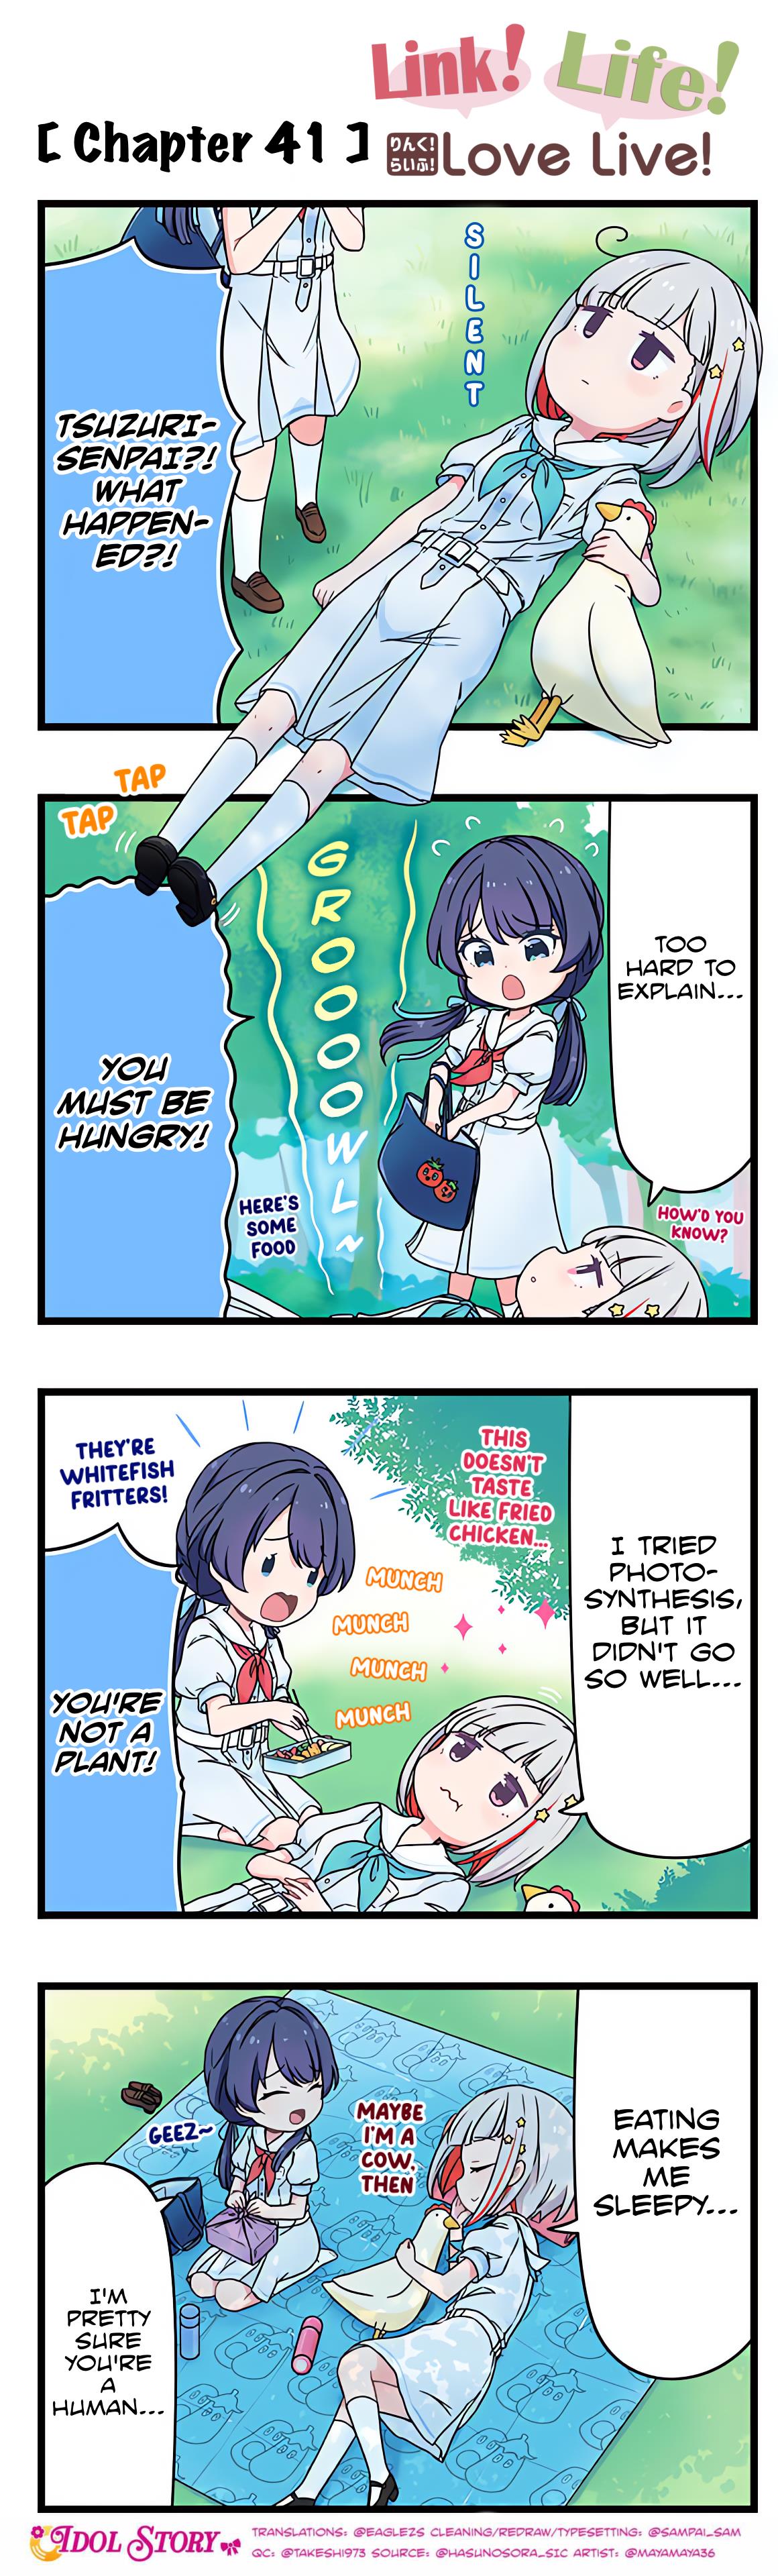 Link! Life! Love Live! Chapter 41 #1